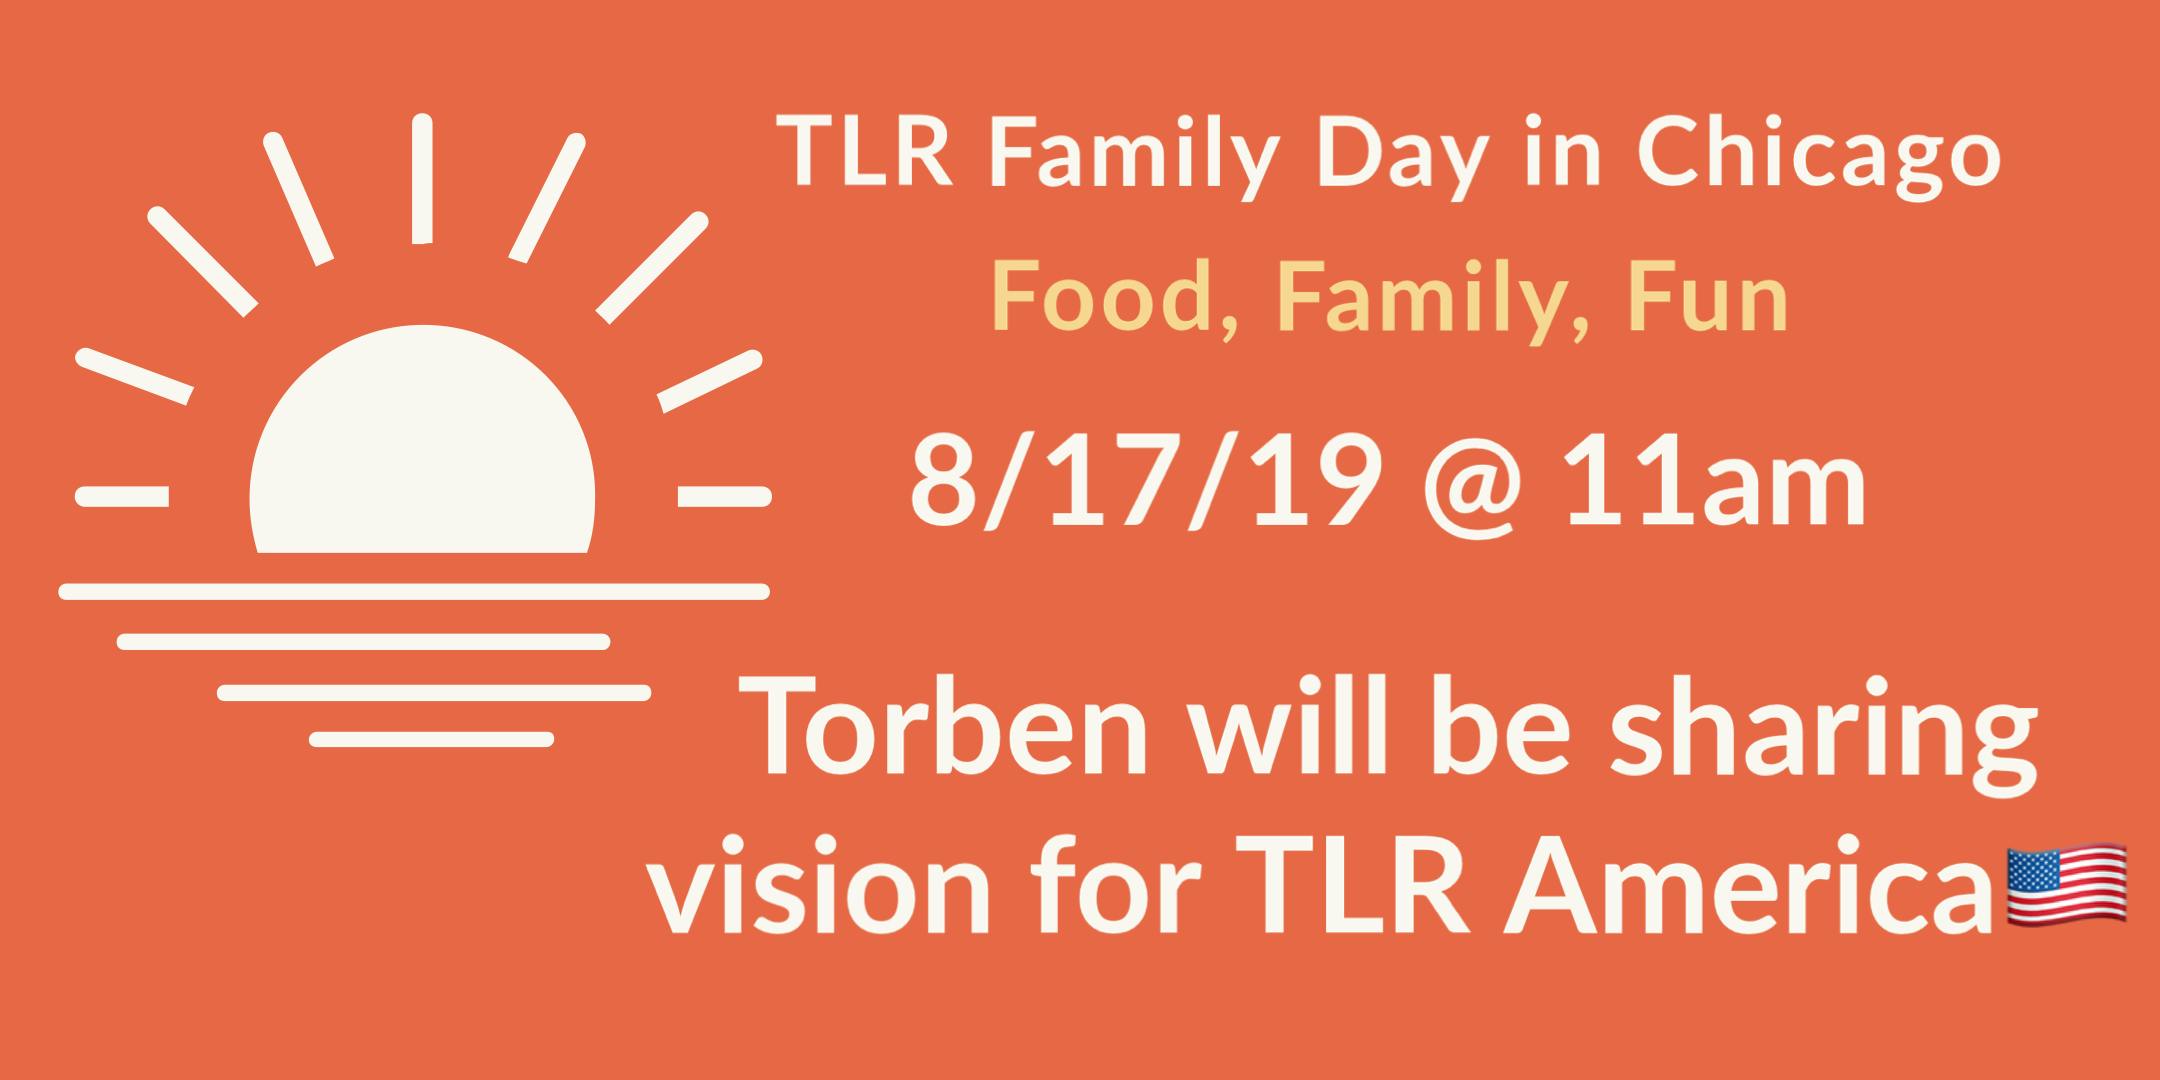 TLR Family Day in Chicago